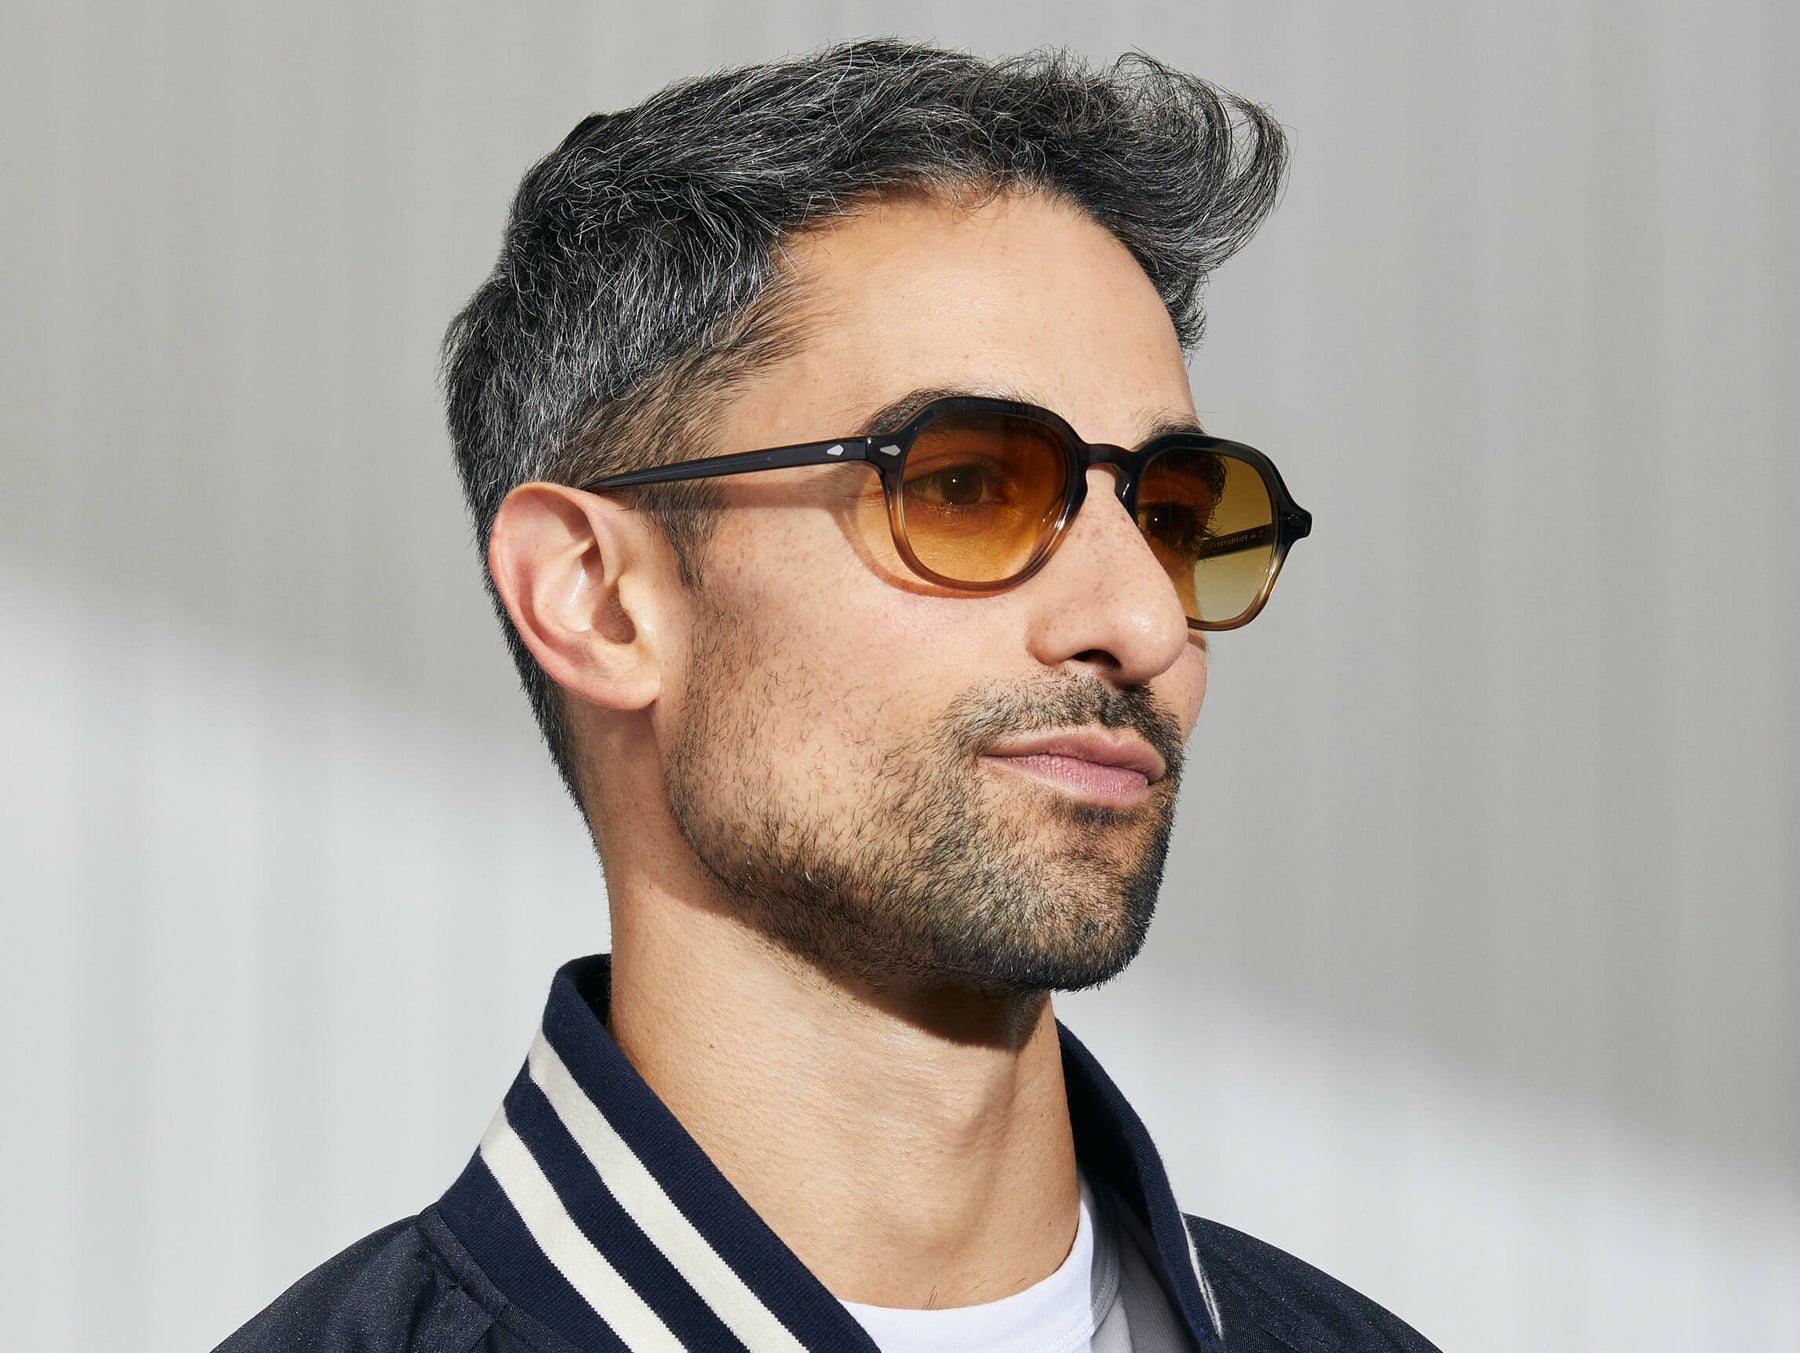 Model is wearing The YENEM SUN in Grey-Brown Fade in size 50 with Chestnut Fade Tinted Lenses